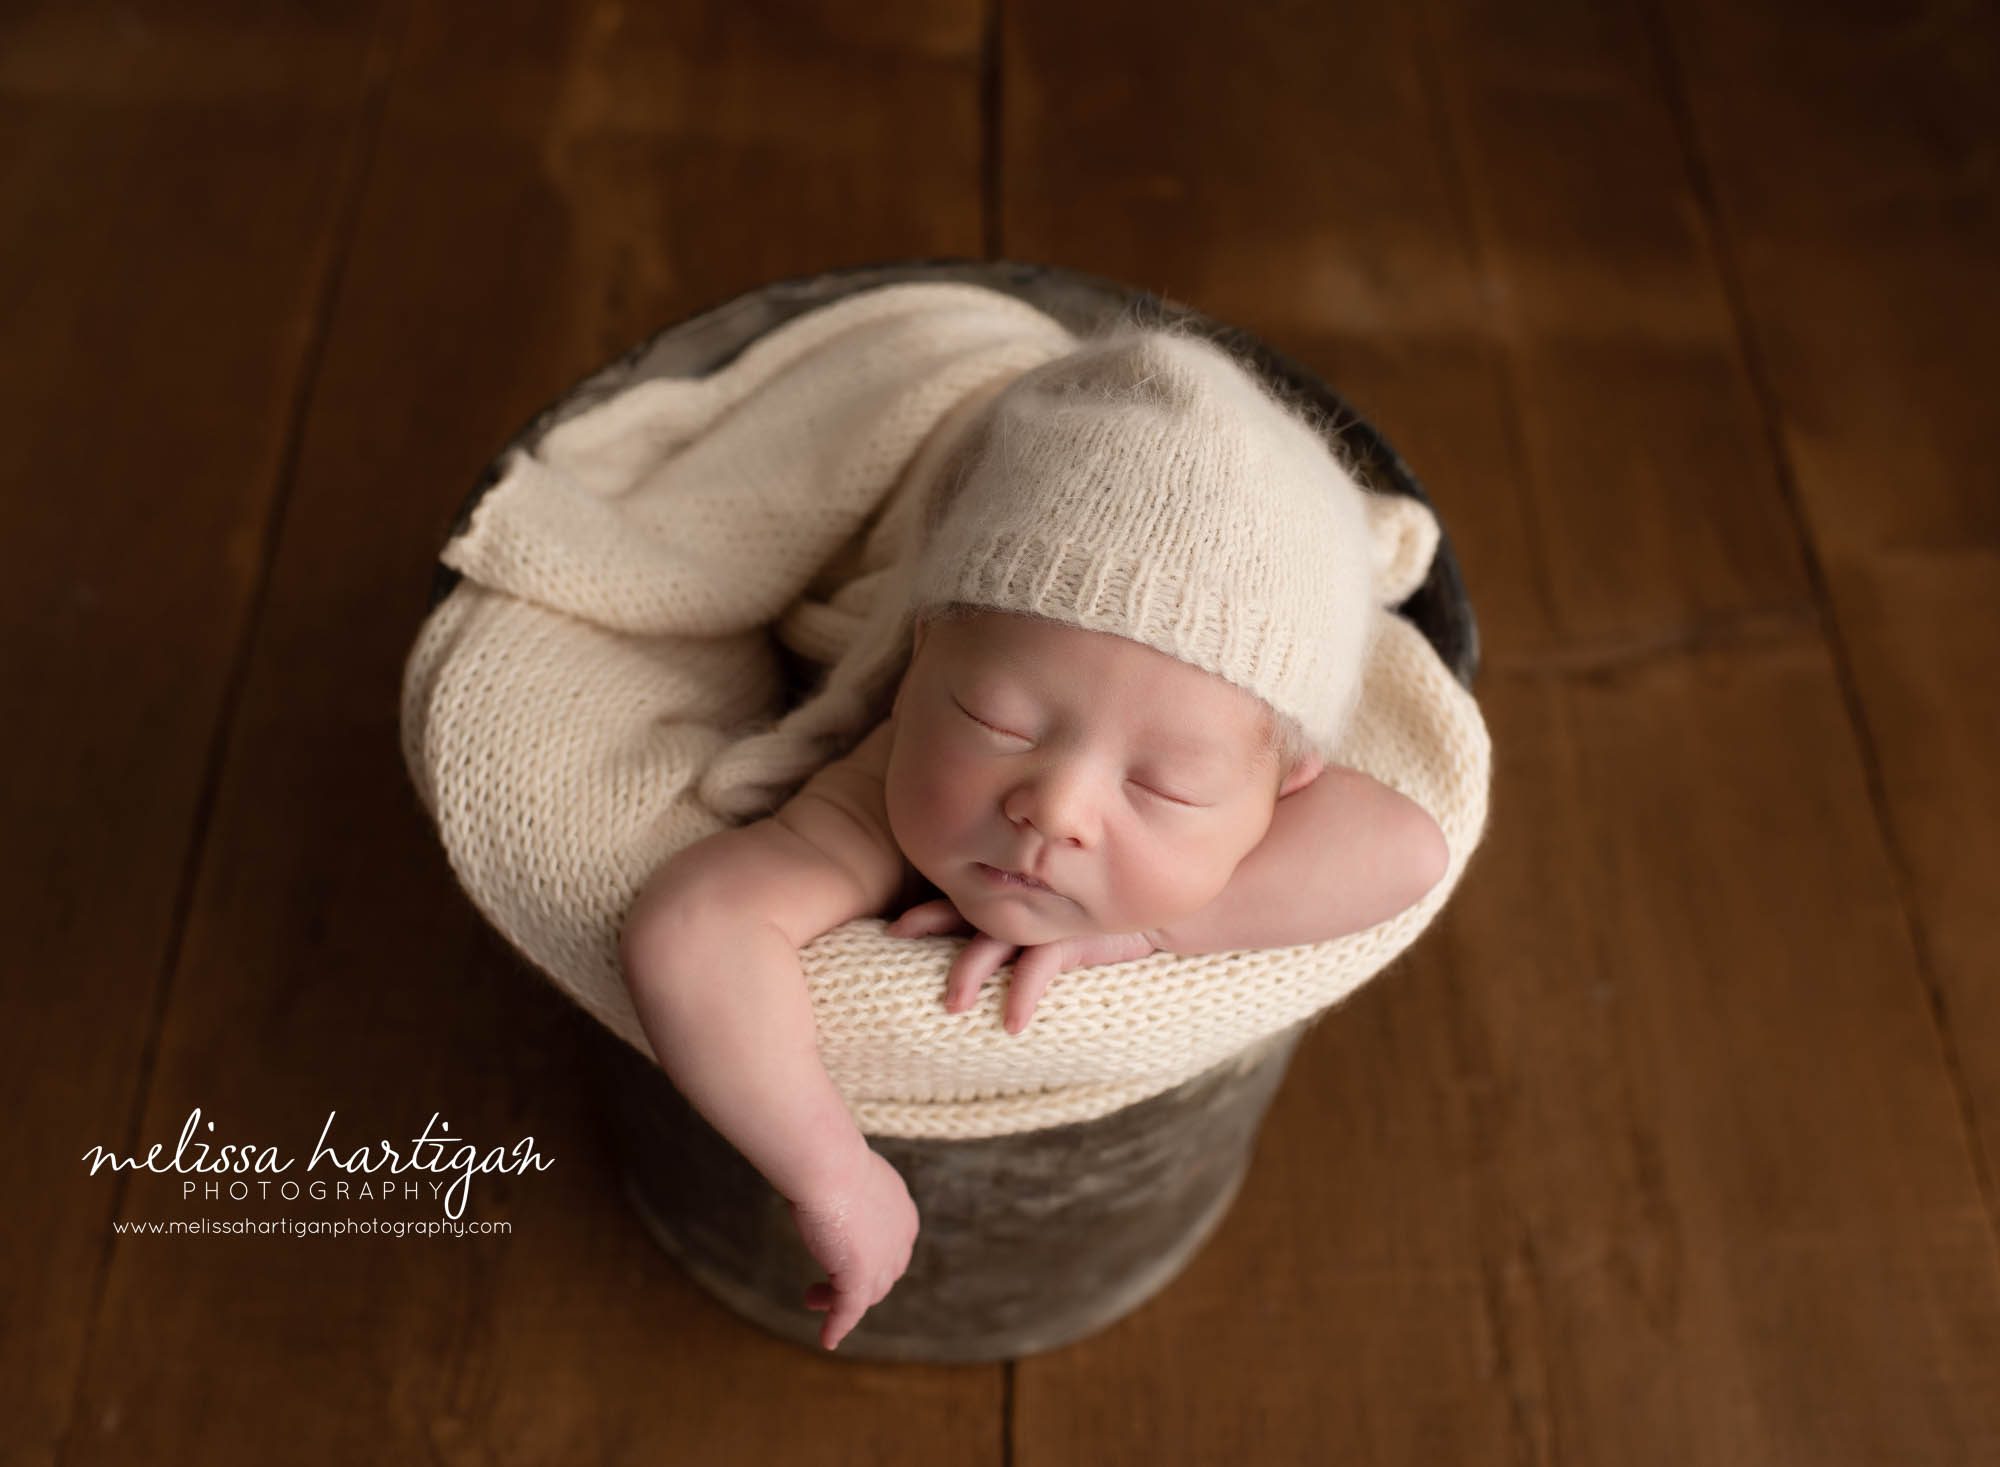 newborn baby boy posed in bucket with cream knitted wrap and sleepy cap